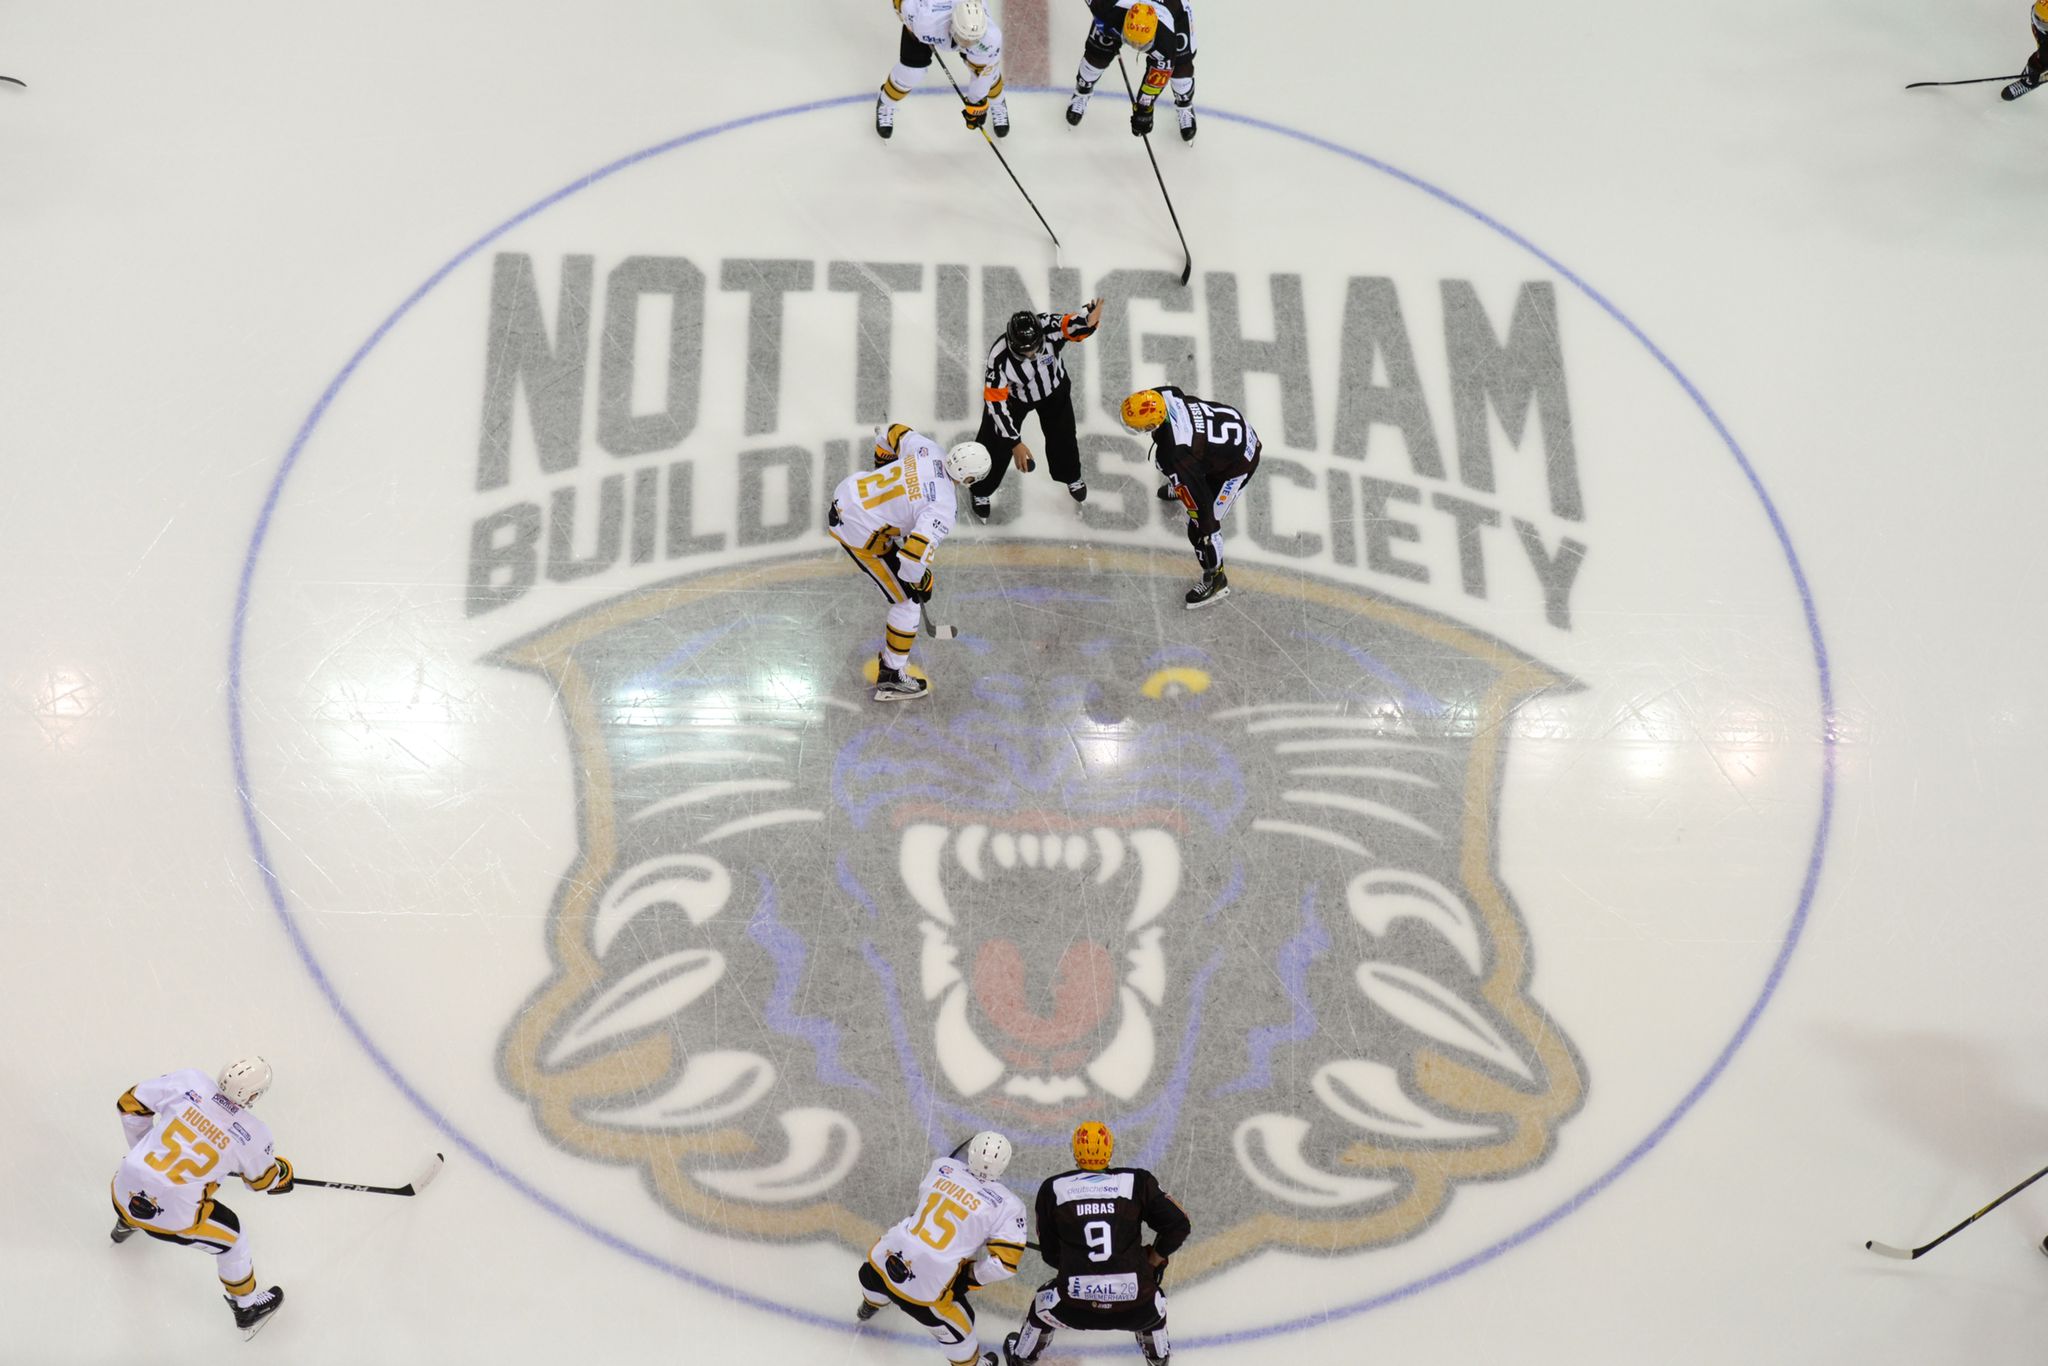 NOTTINGHAM BUILDING SOCIETY BACK FOR FIFTH SEASON Top Image